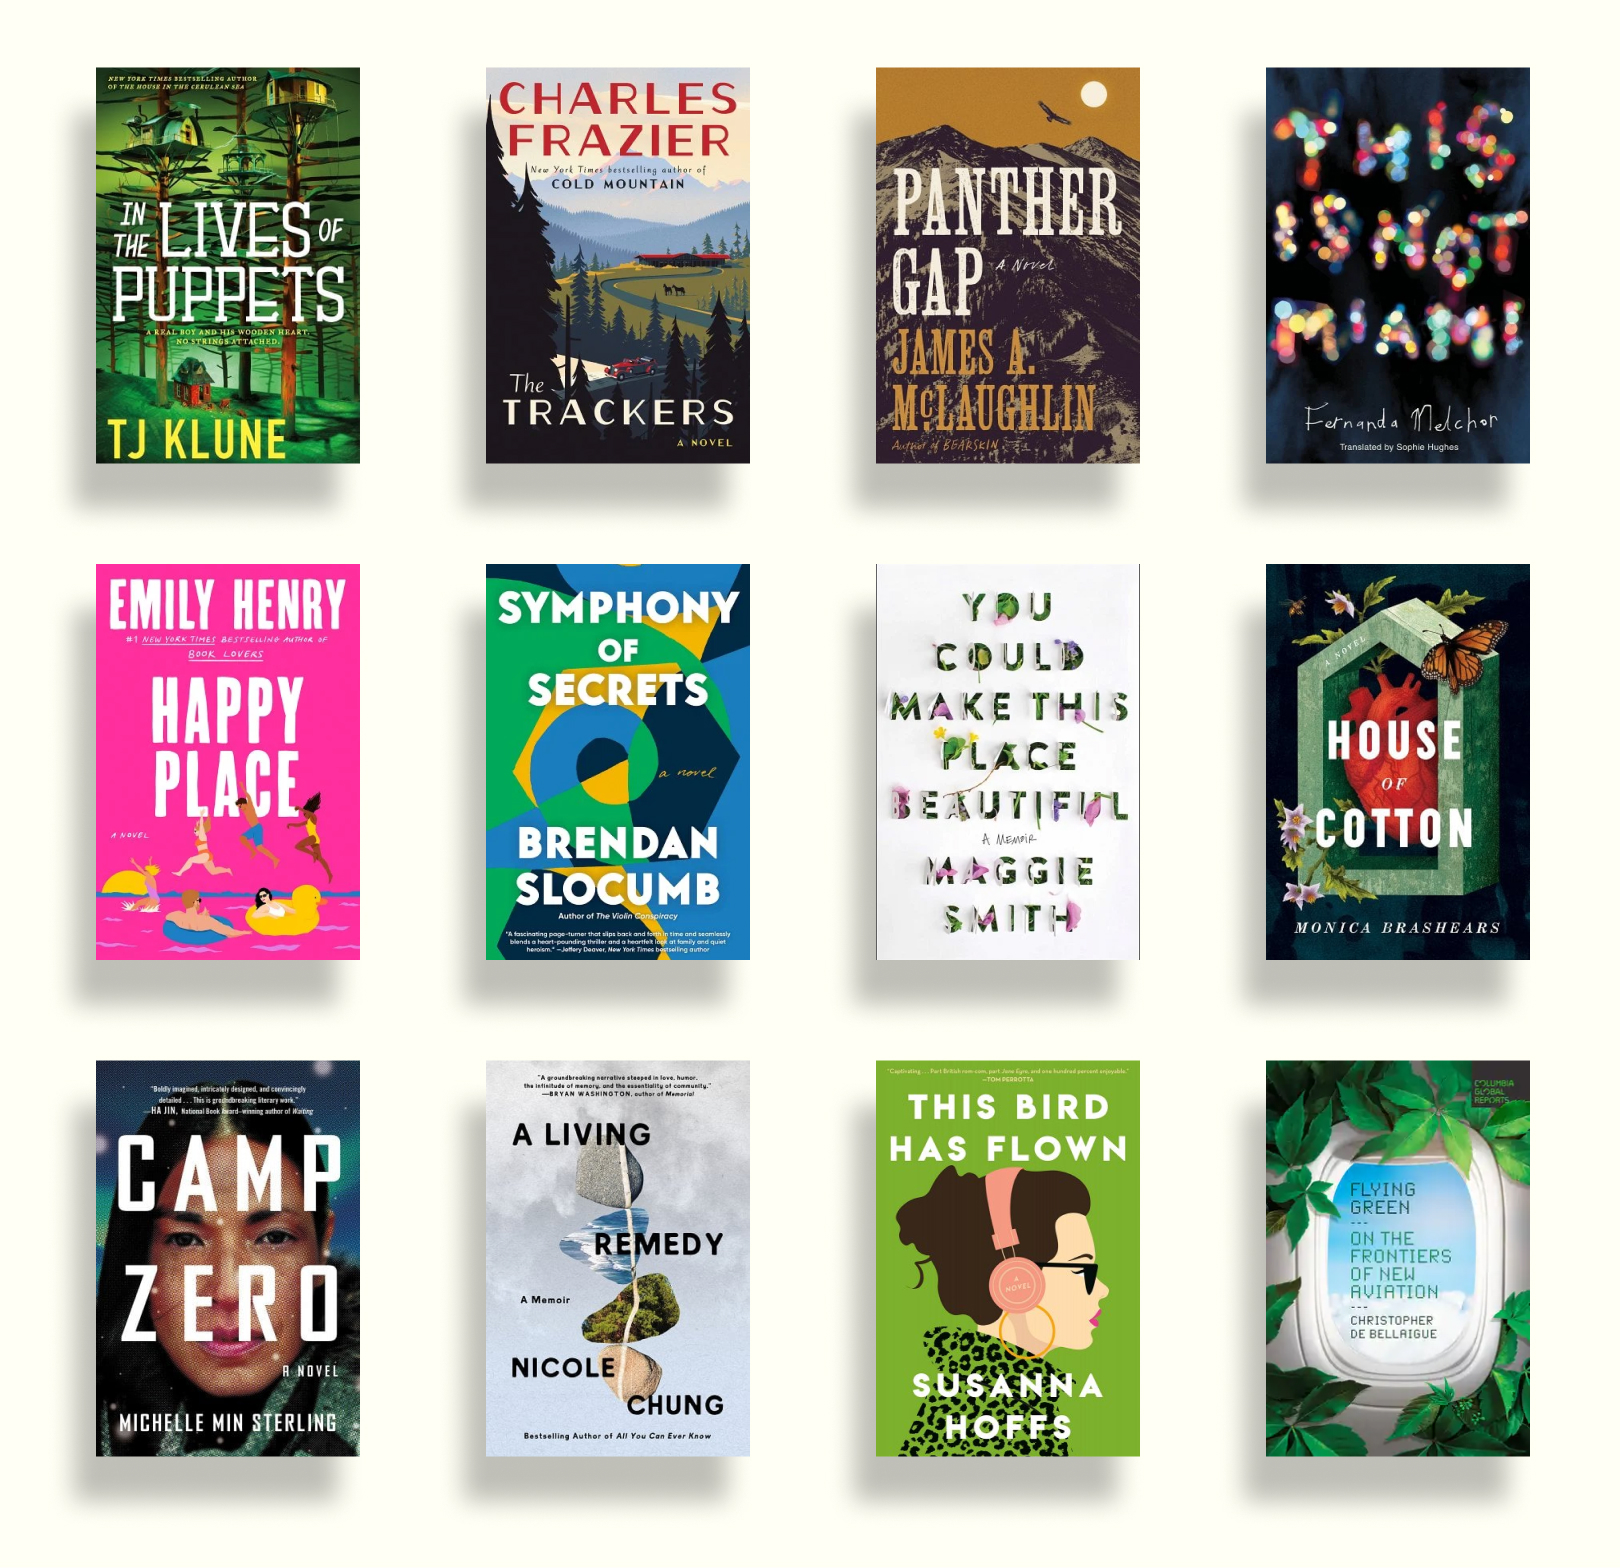 Article image for: 12 New Books Coming in April